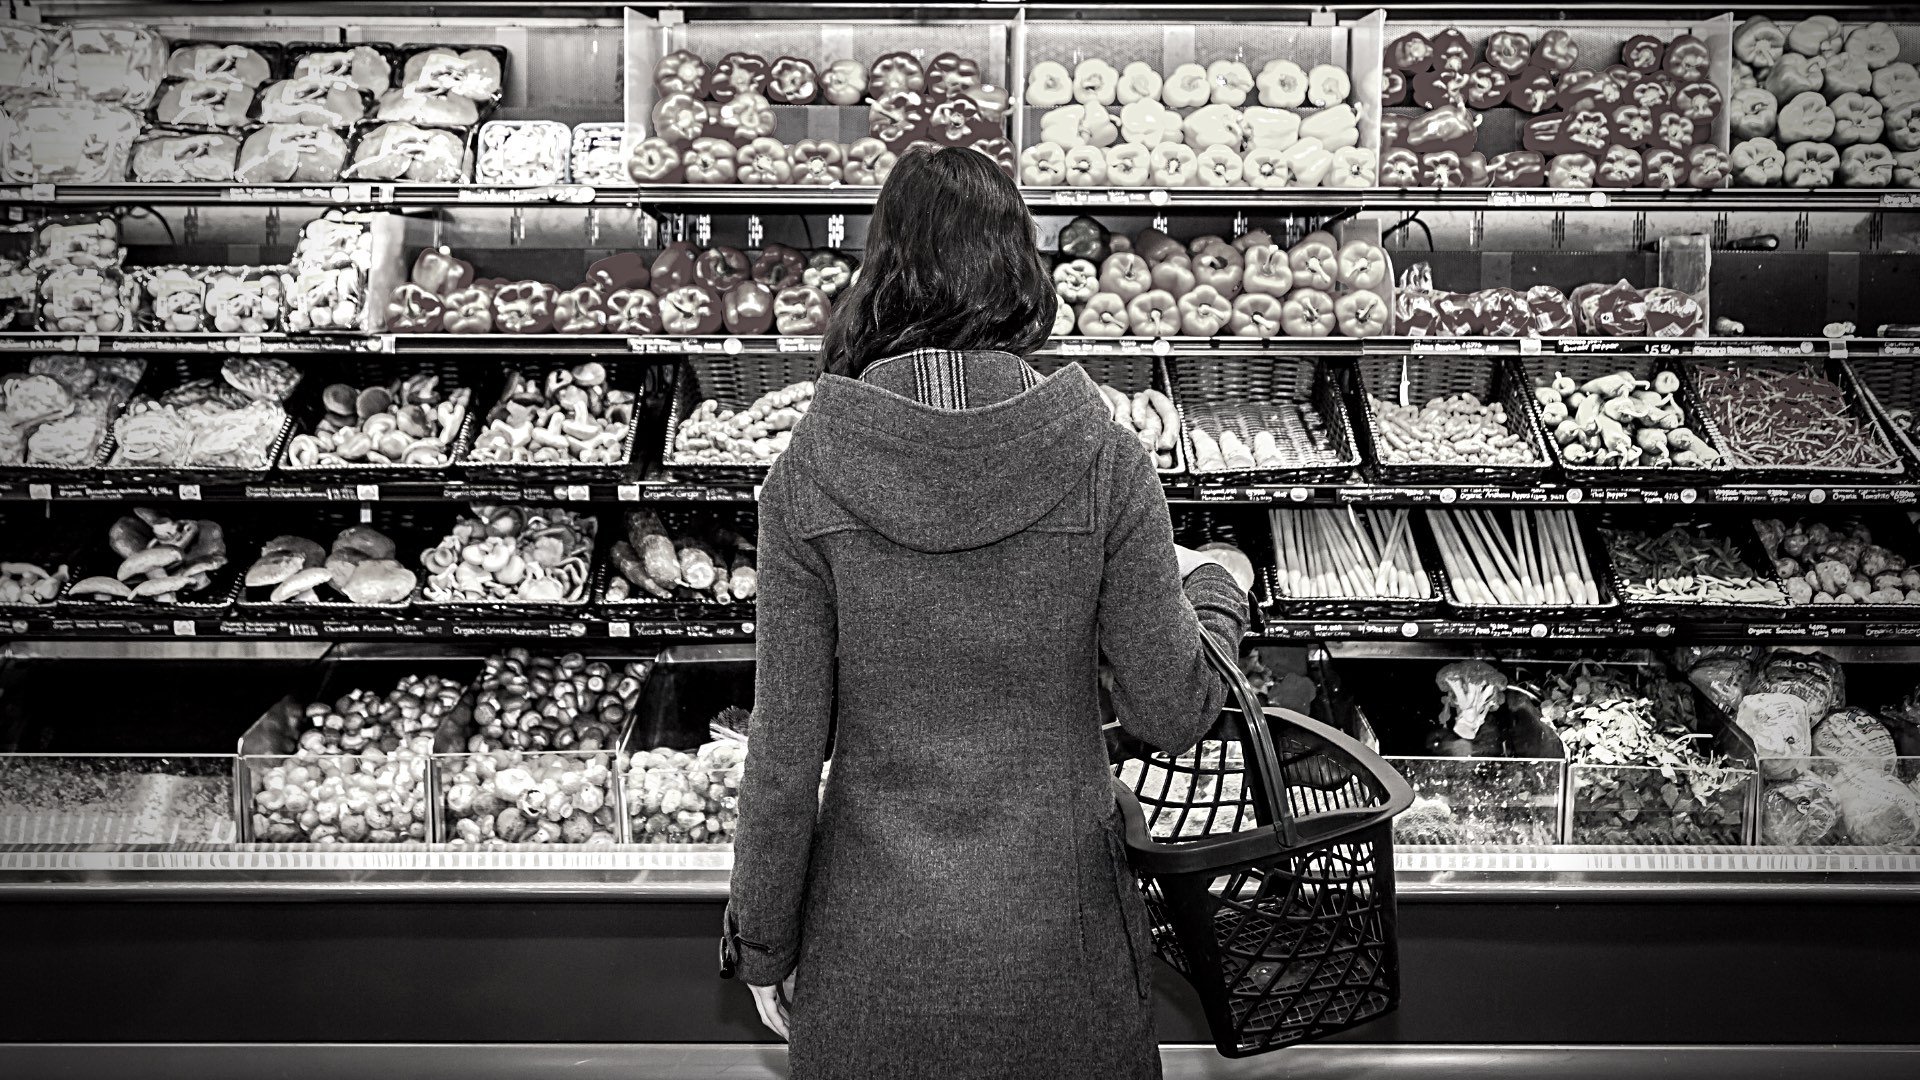 Woman looking at produce section